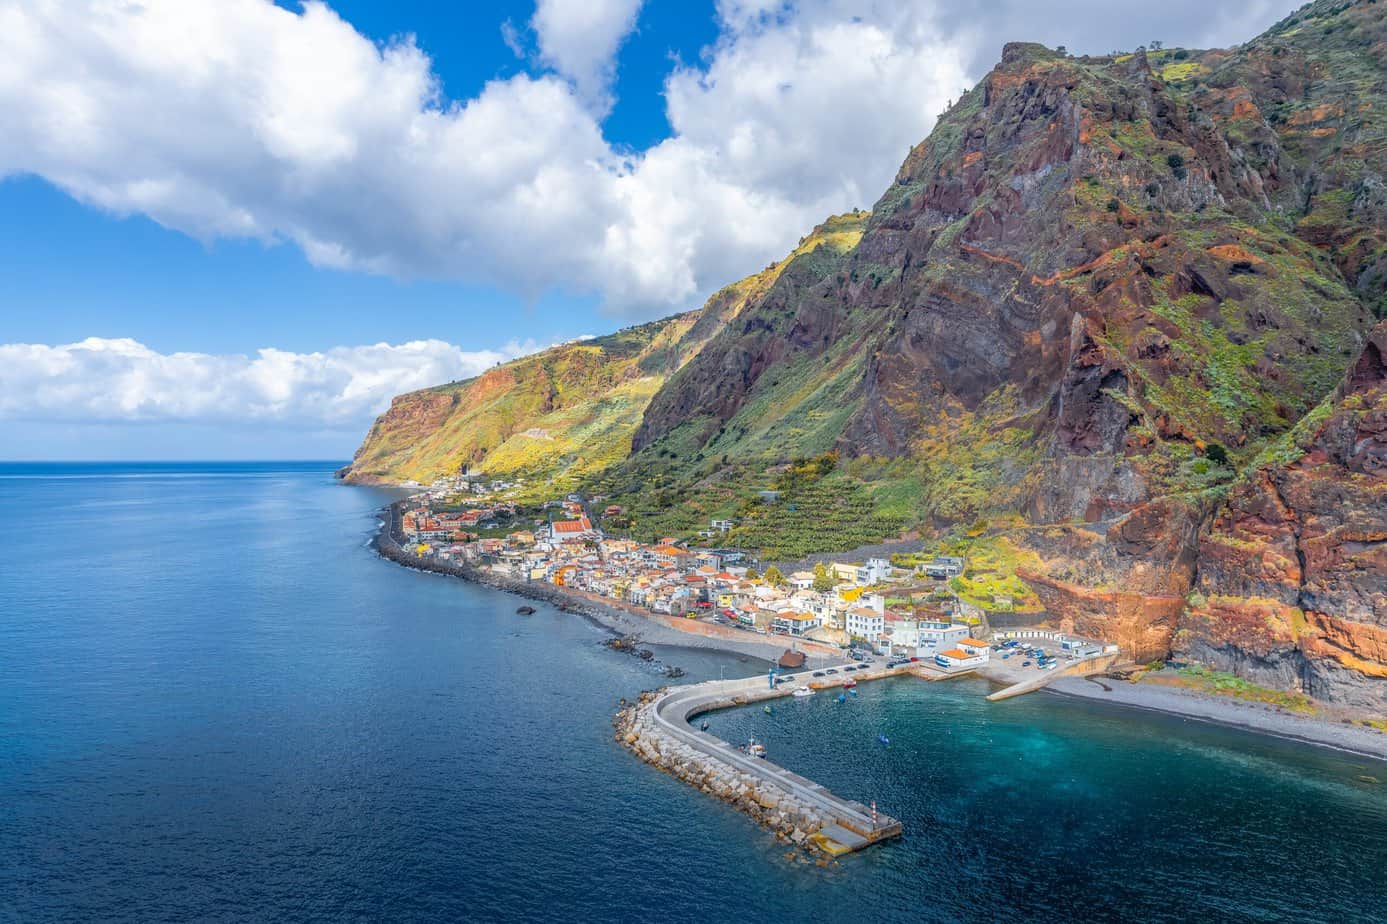 An aerial view of a village on a cliff overlooking the ocean in Madeira.